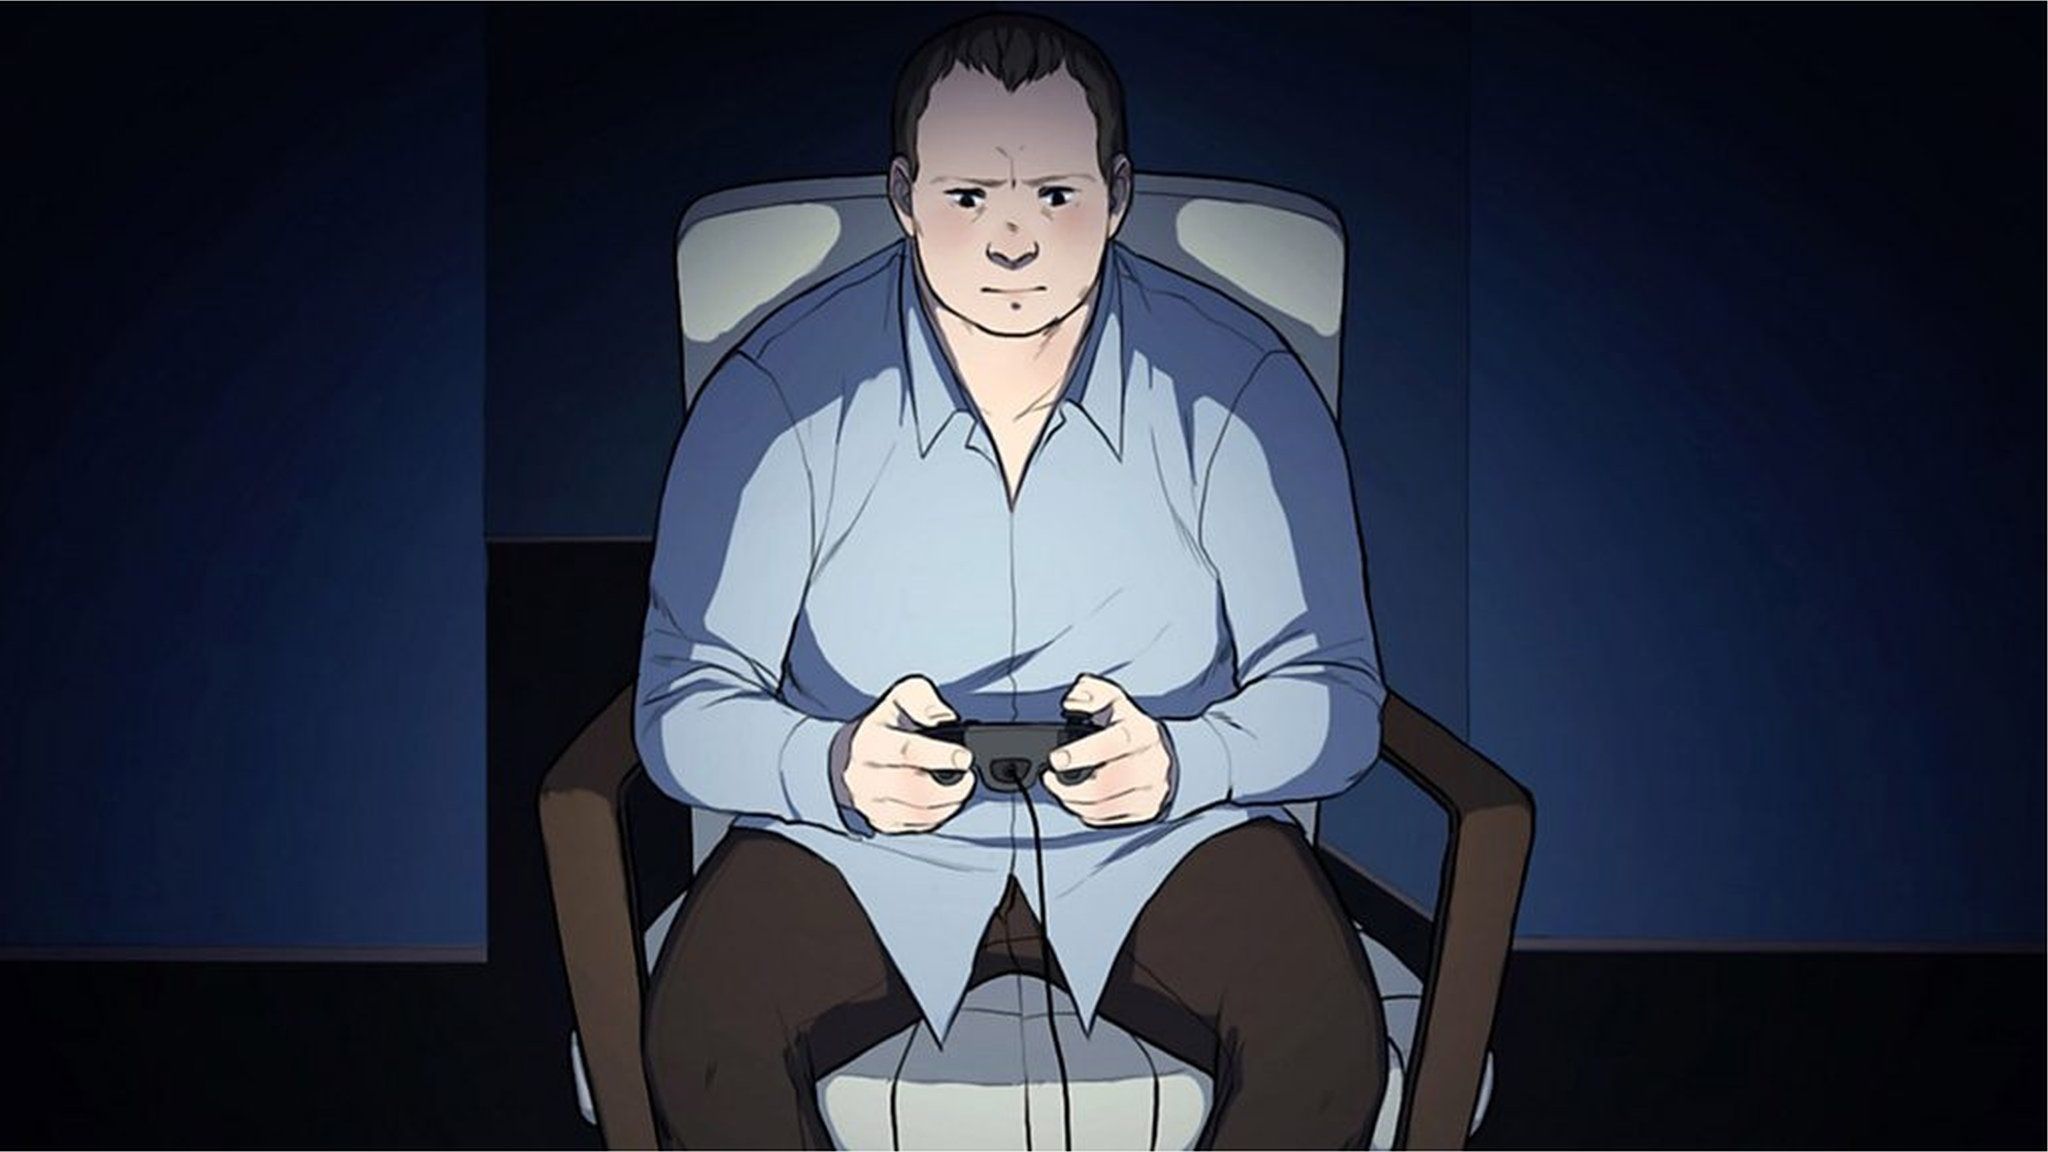 Line drawing of a man playing a video game